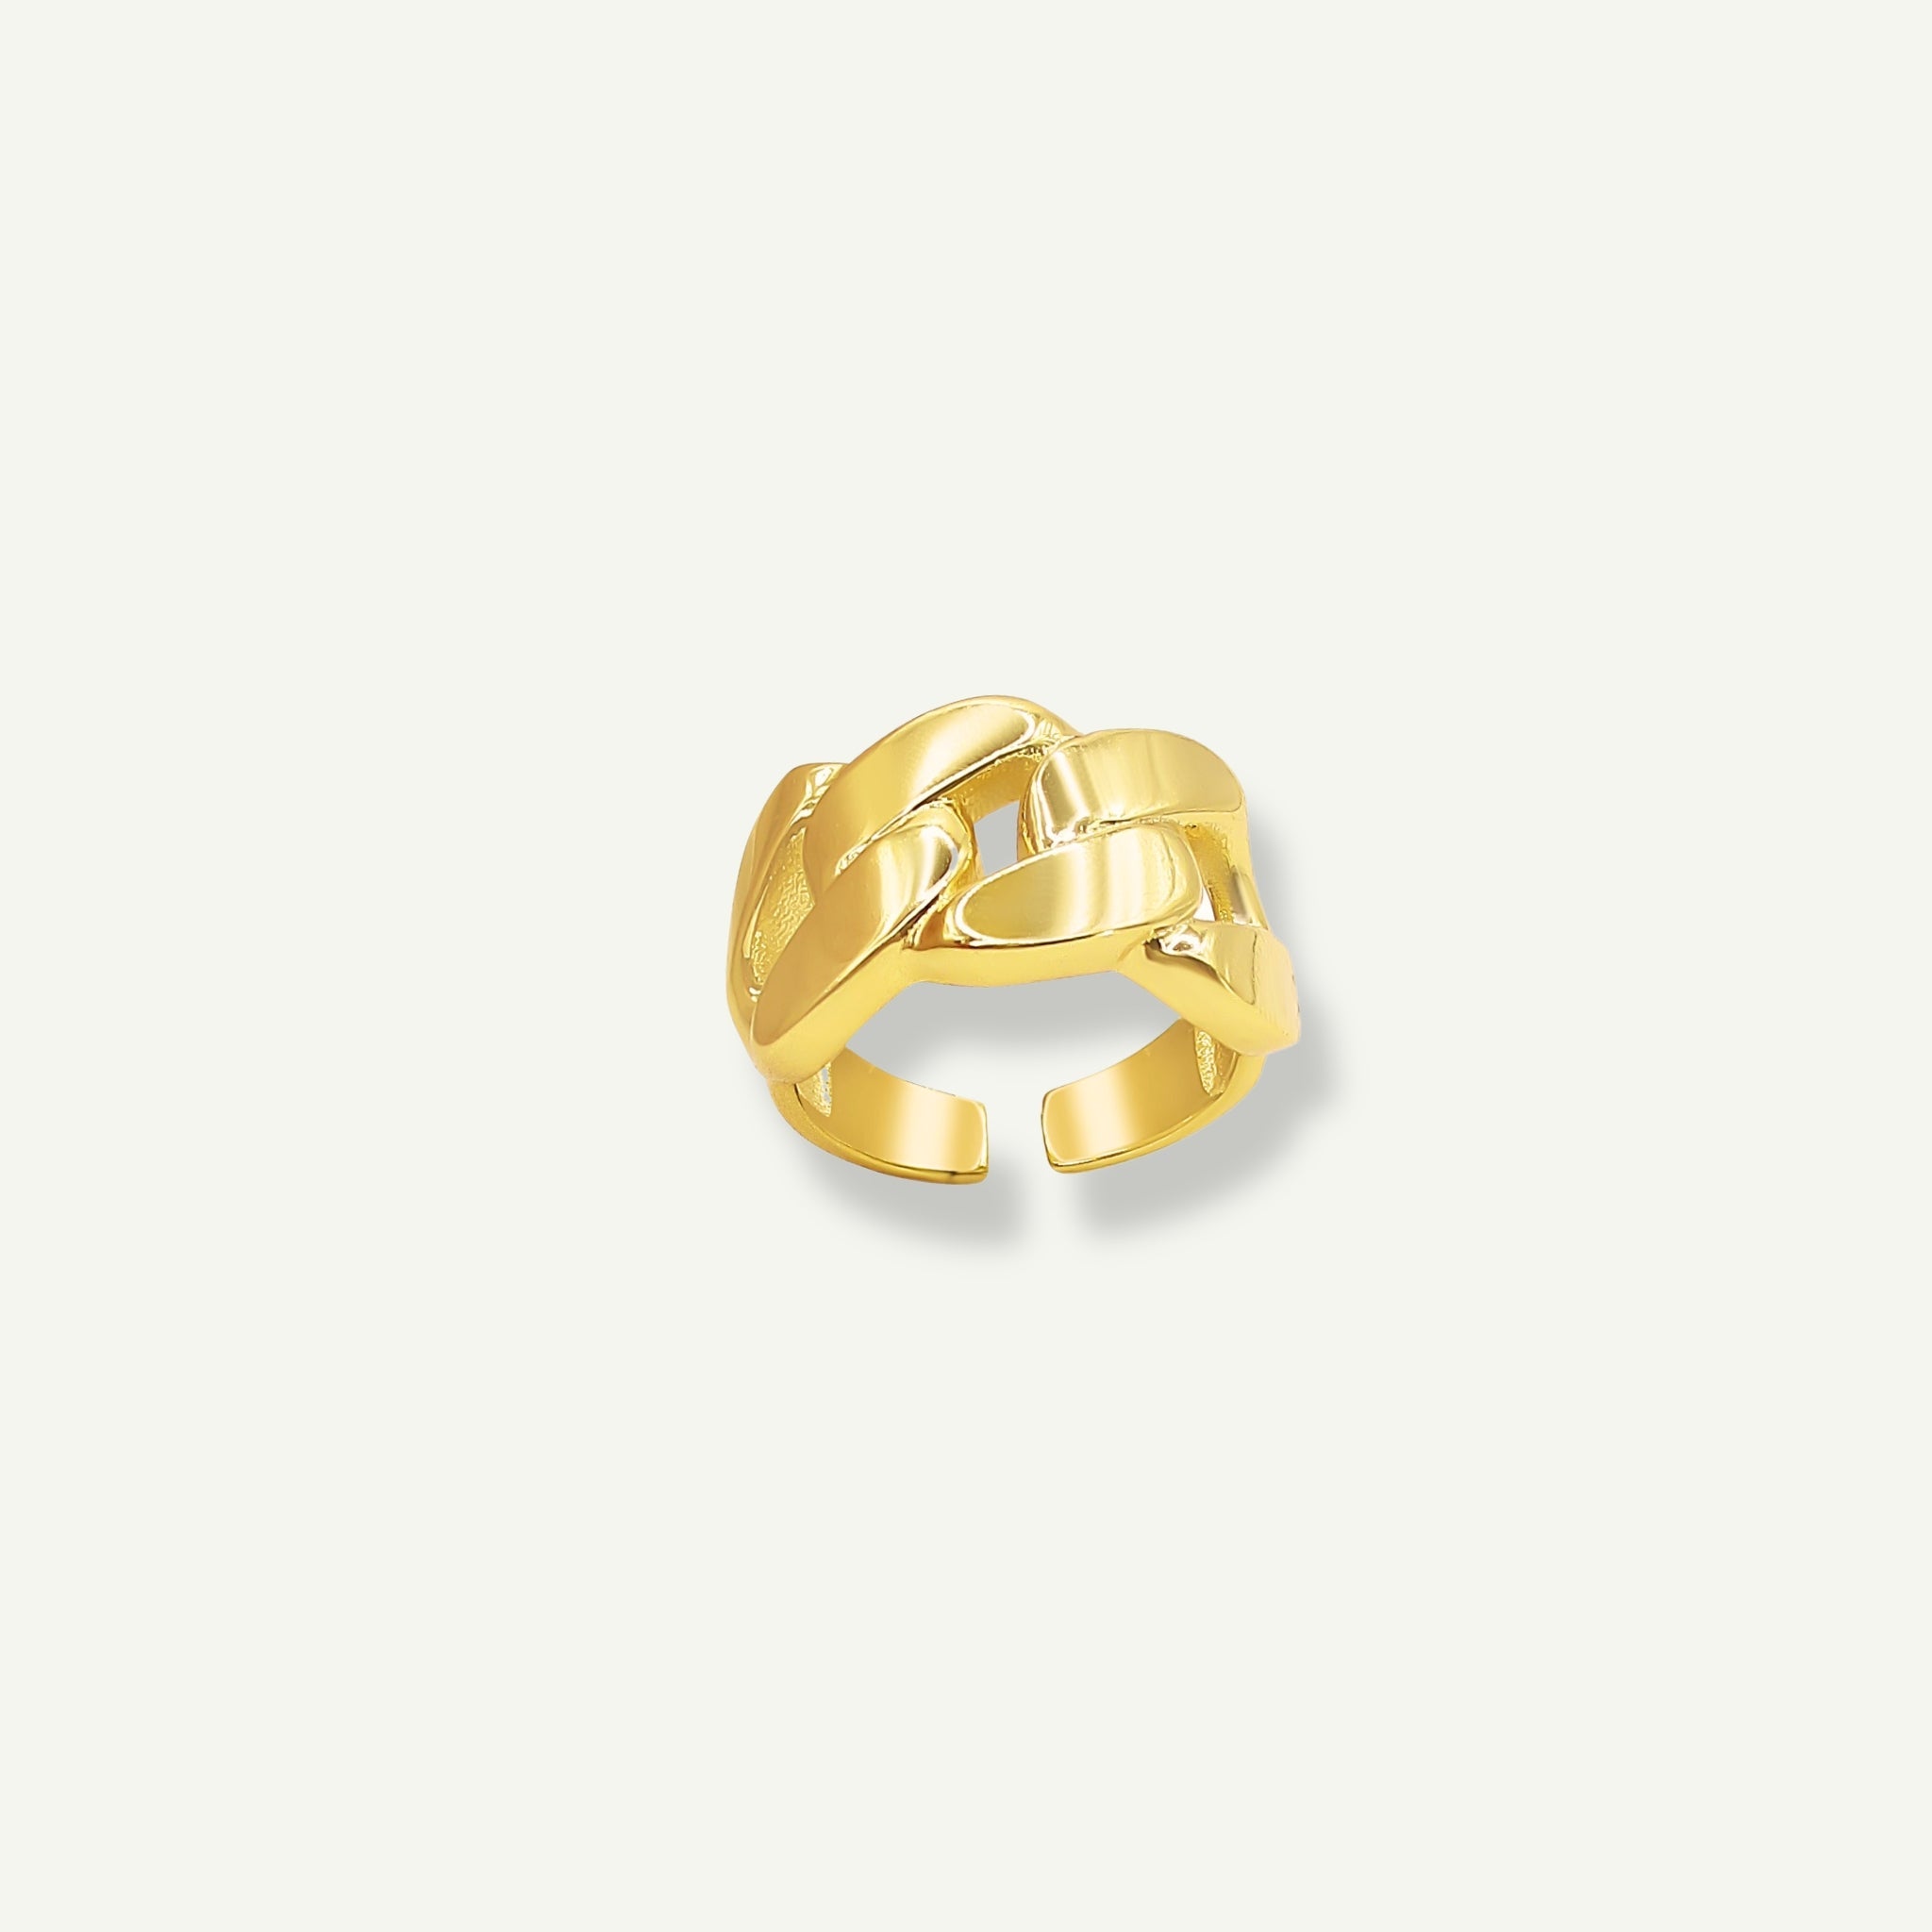 Chained in Chick | Adjustable Ring - Jewel Your Way